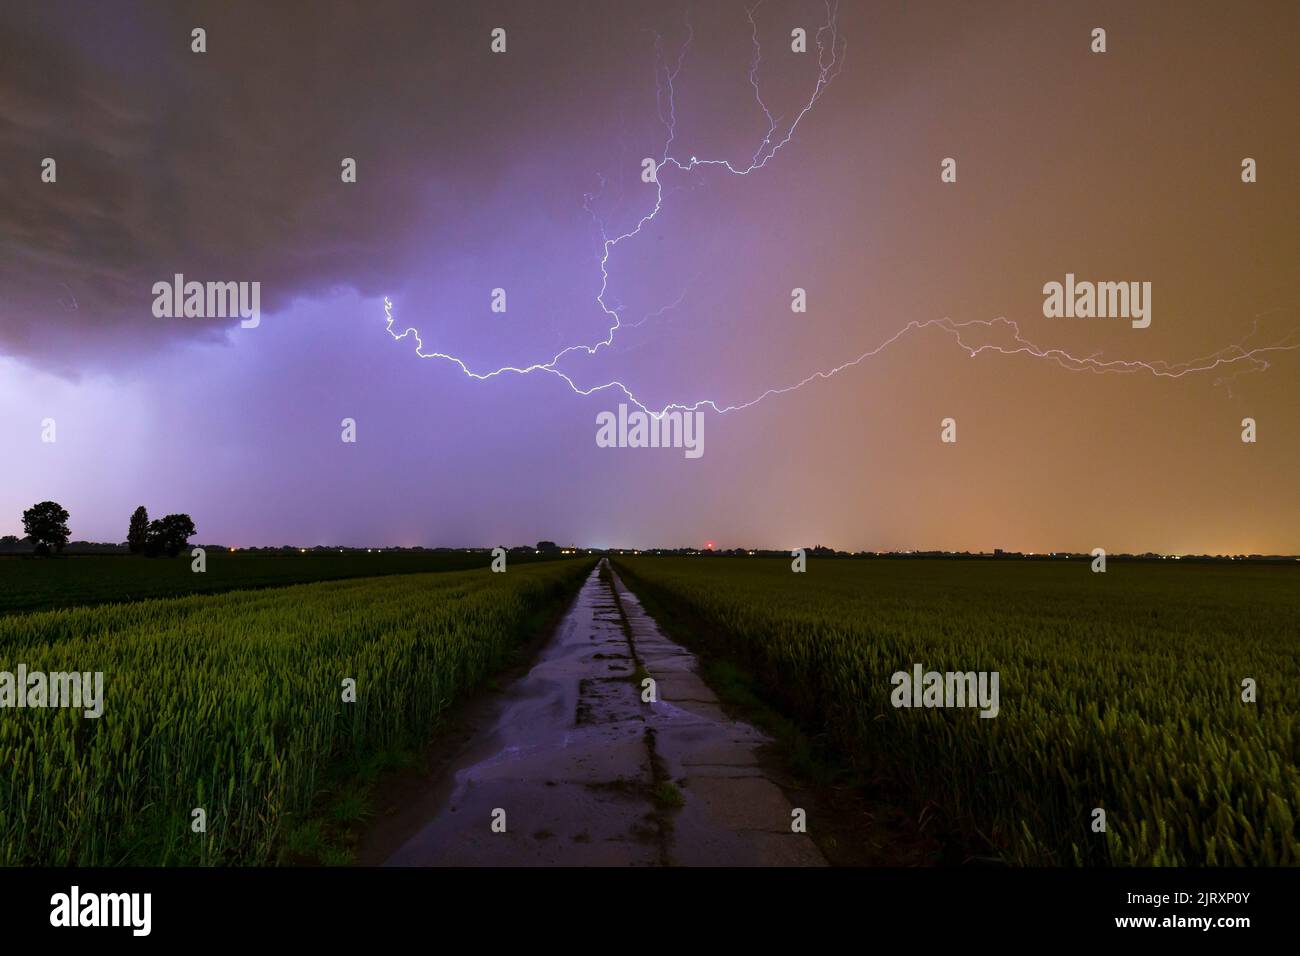 Lightning strikes close by causing a purple color in the clouded sky above farmland Stock Photo